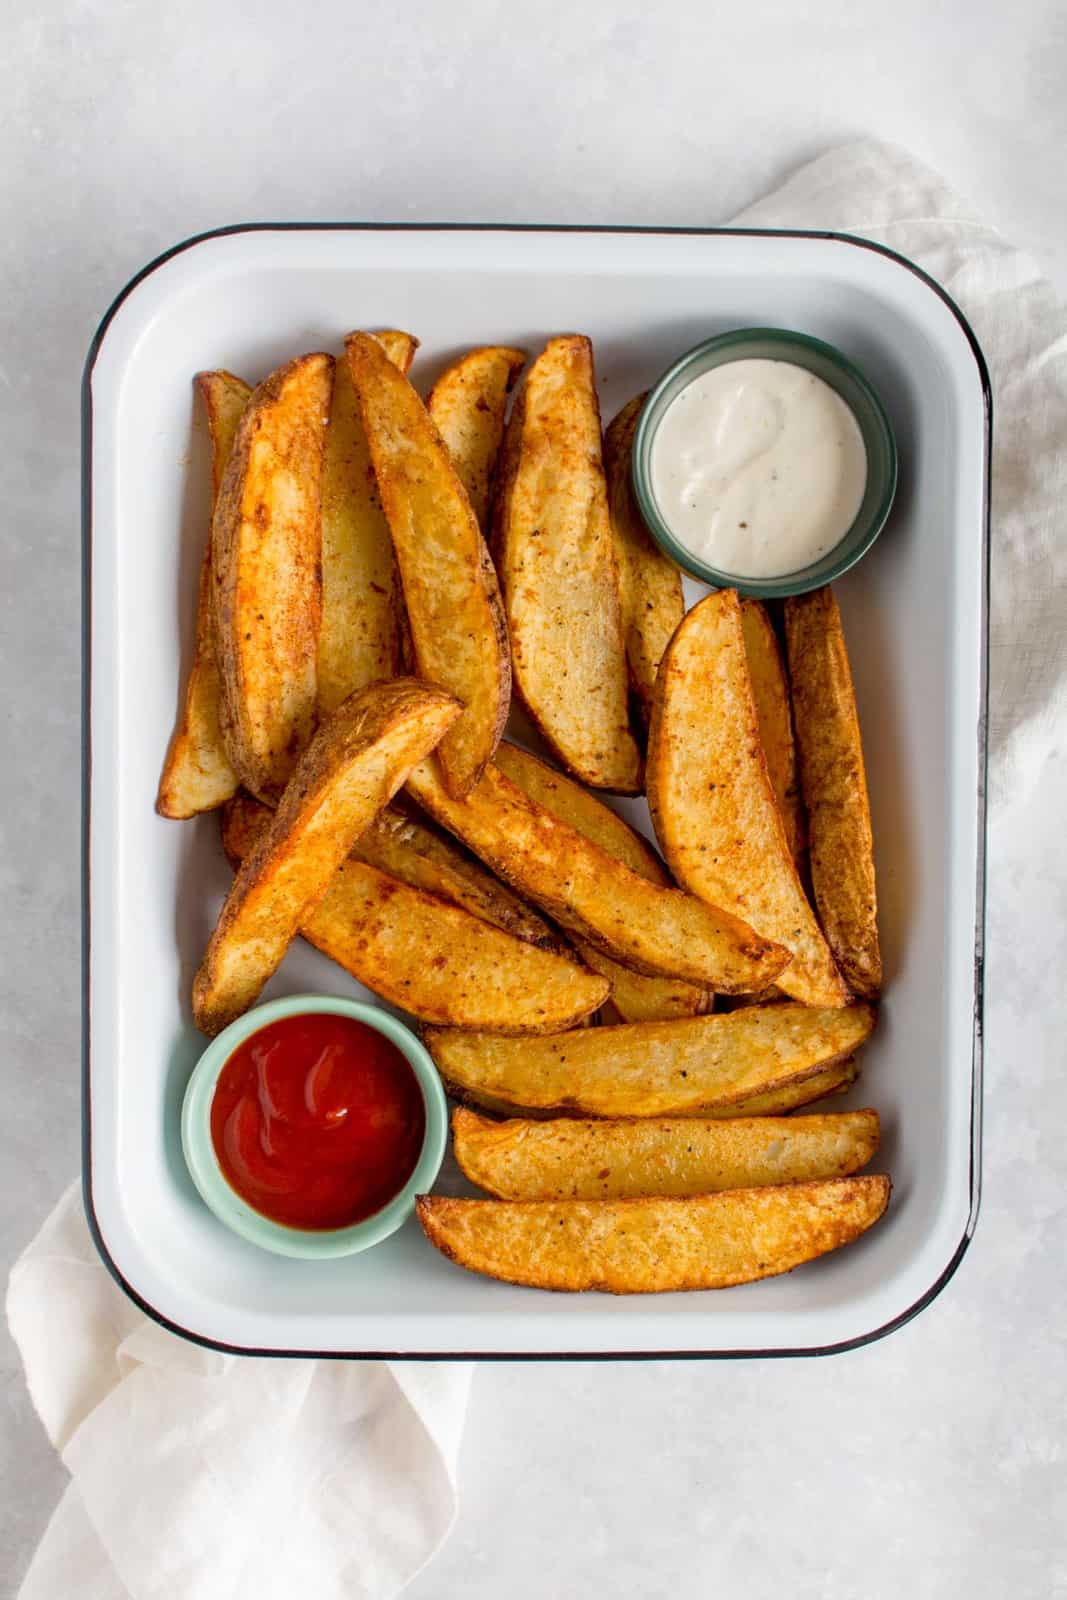 Overhead view of a tray of air fryer potato wedges.